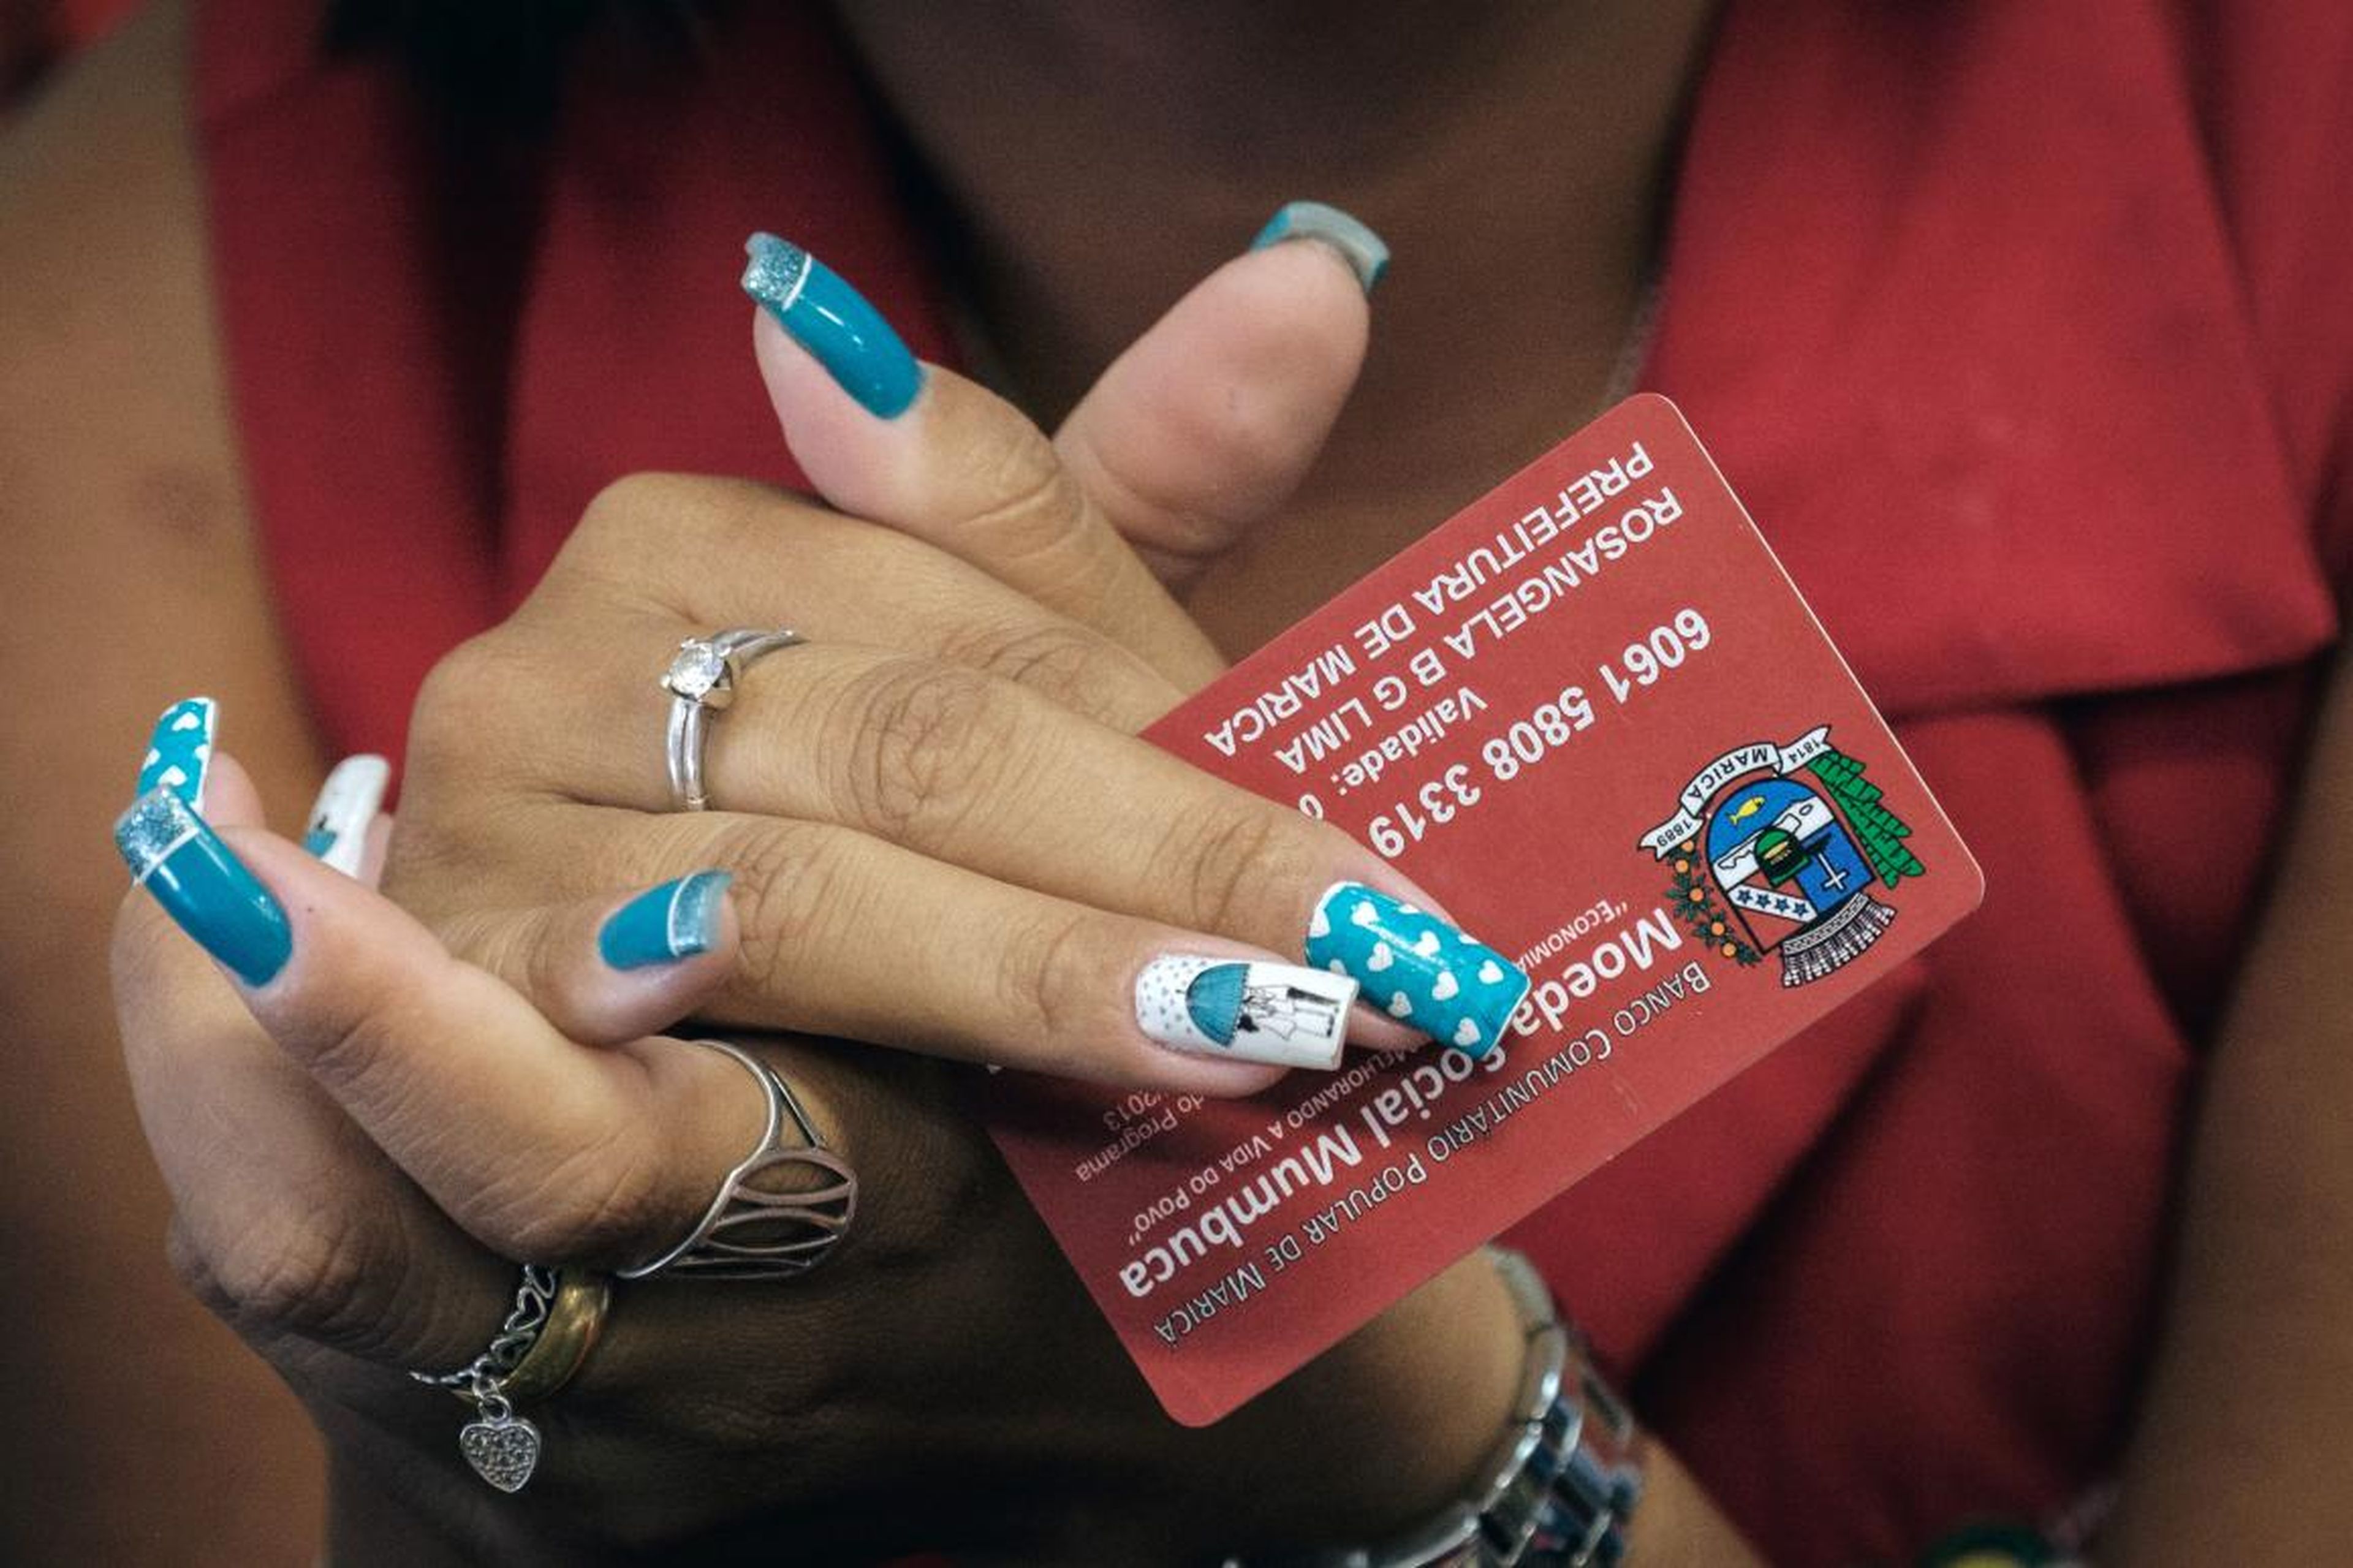 A cashier holds a "mumbuca" card at a pharmacy in Marica, Brazil.